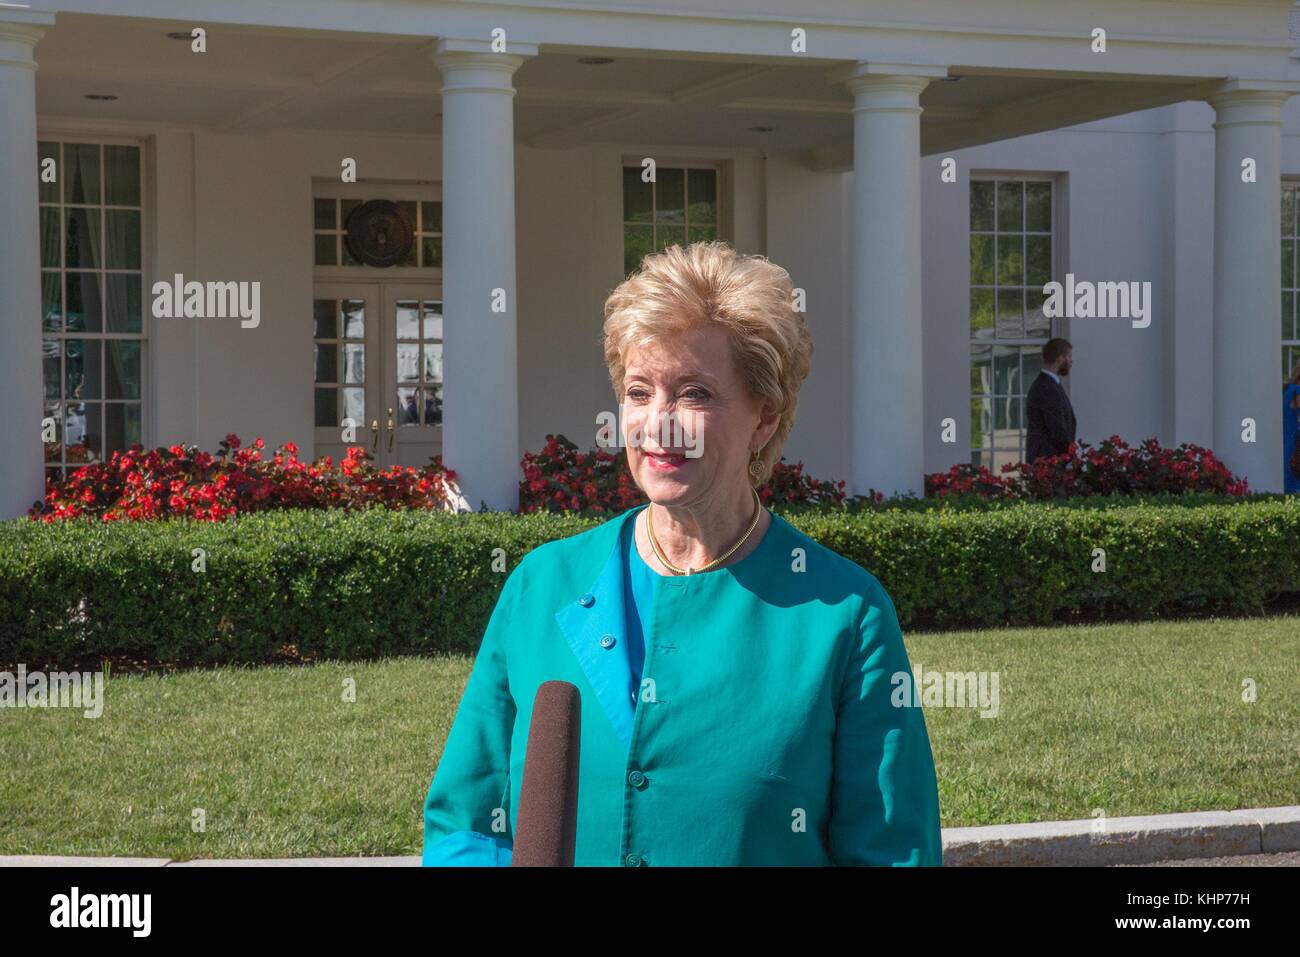 U.S. Administrator of the Small Business Administration Linda McMahon speaks to the media outside the West Wing of the White House July 25, 2017 in Washington, D.C. Stock Photo